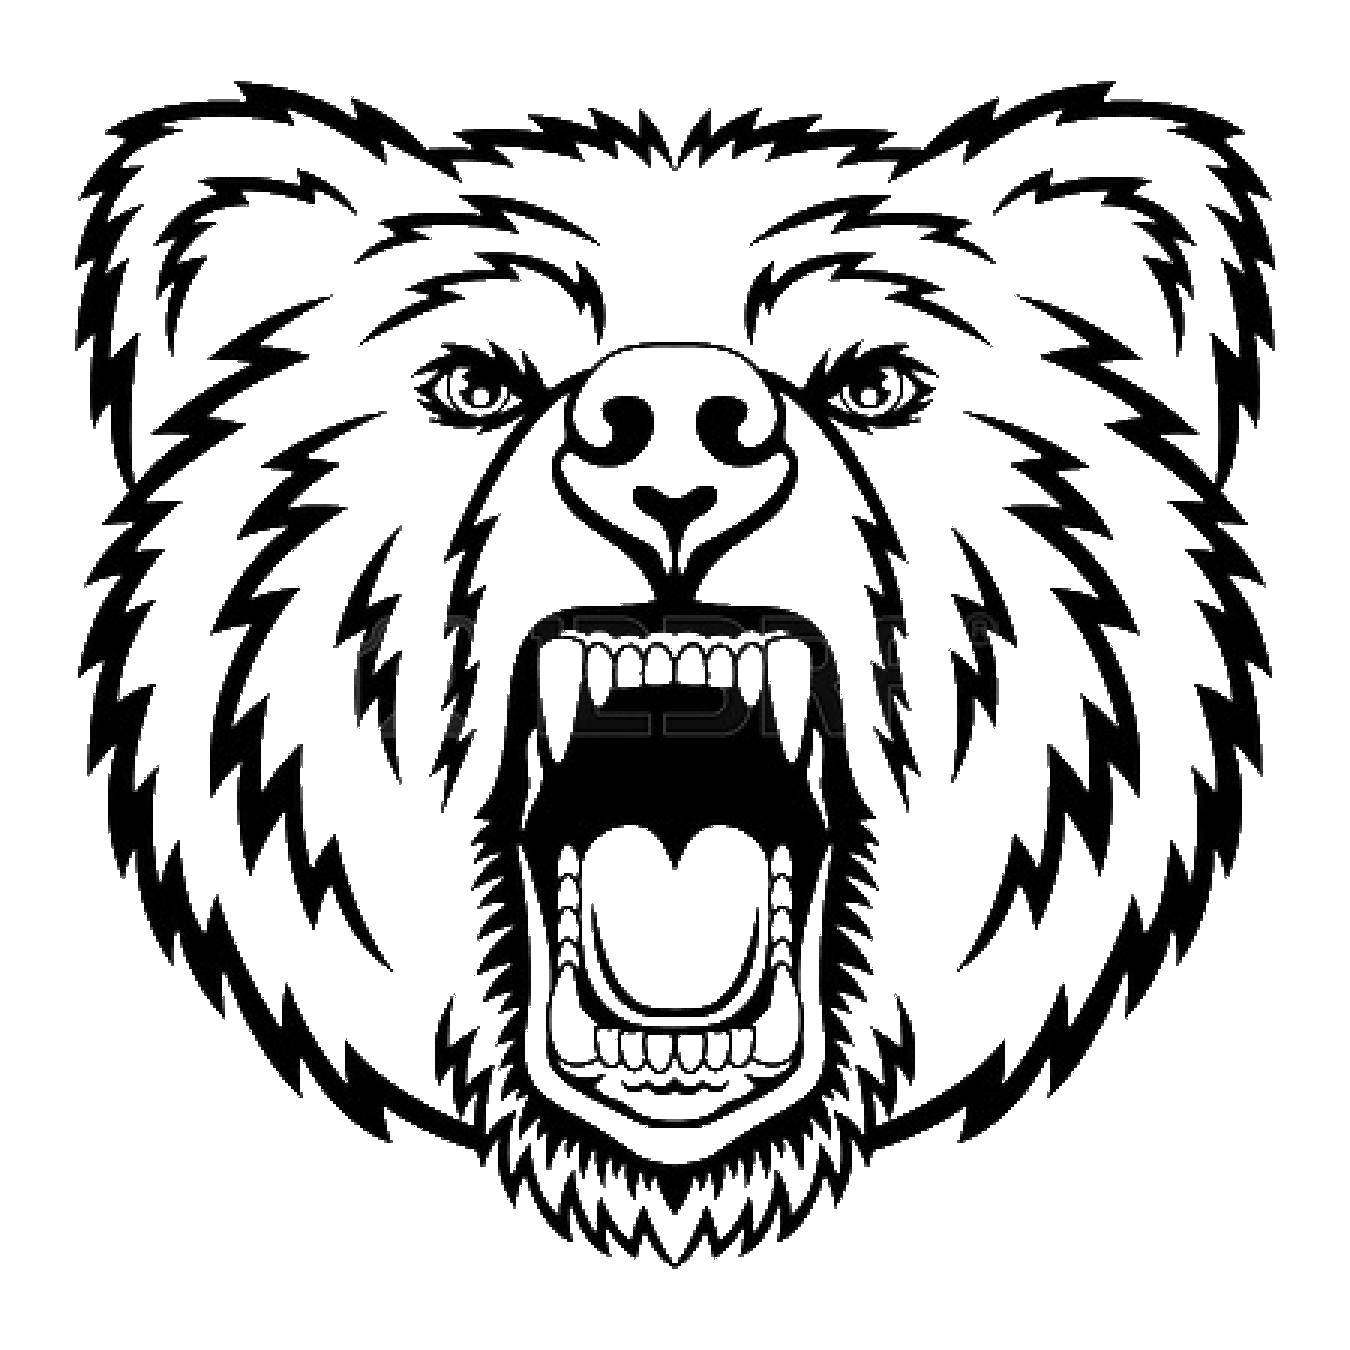 Coloring Ivan bear. Category The outline of a bear to cut. Tags:  Animals, bear.